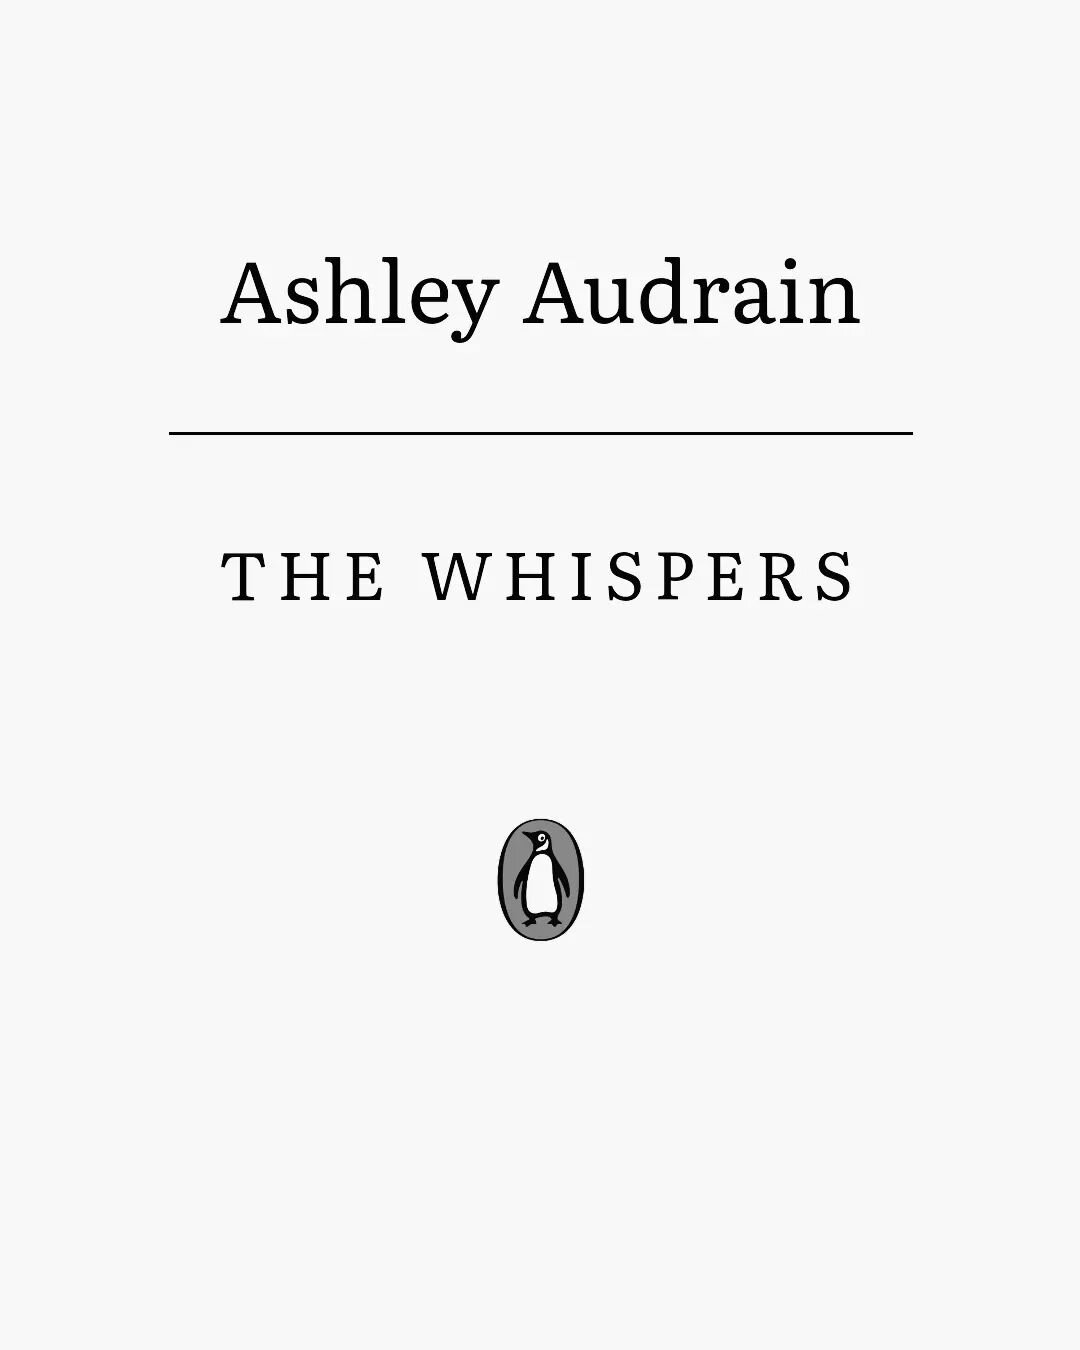 The Whispers by @ashleyaudrain captivated me so much I read it in the five hours my flight was delayed. I couldn't put it down. It explores four women's nuanced existances within their roles as mothers and wives. It centers around the dark complexiti